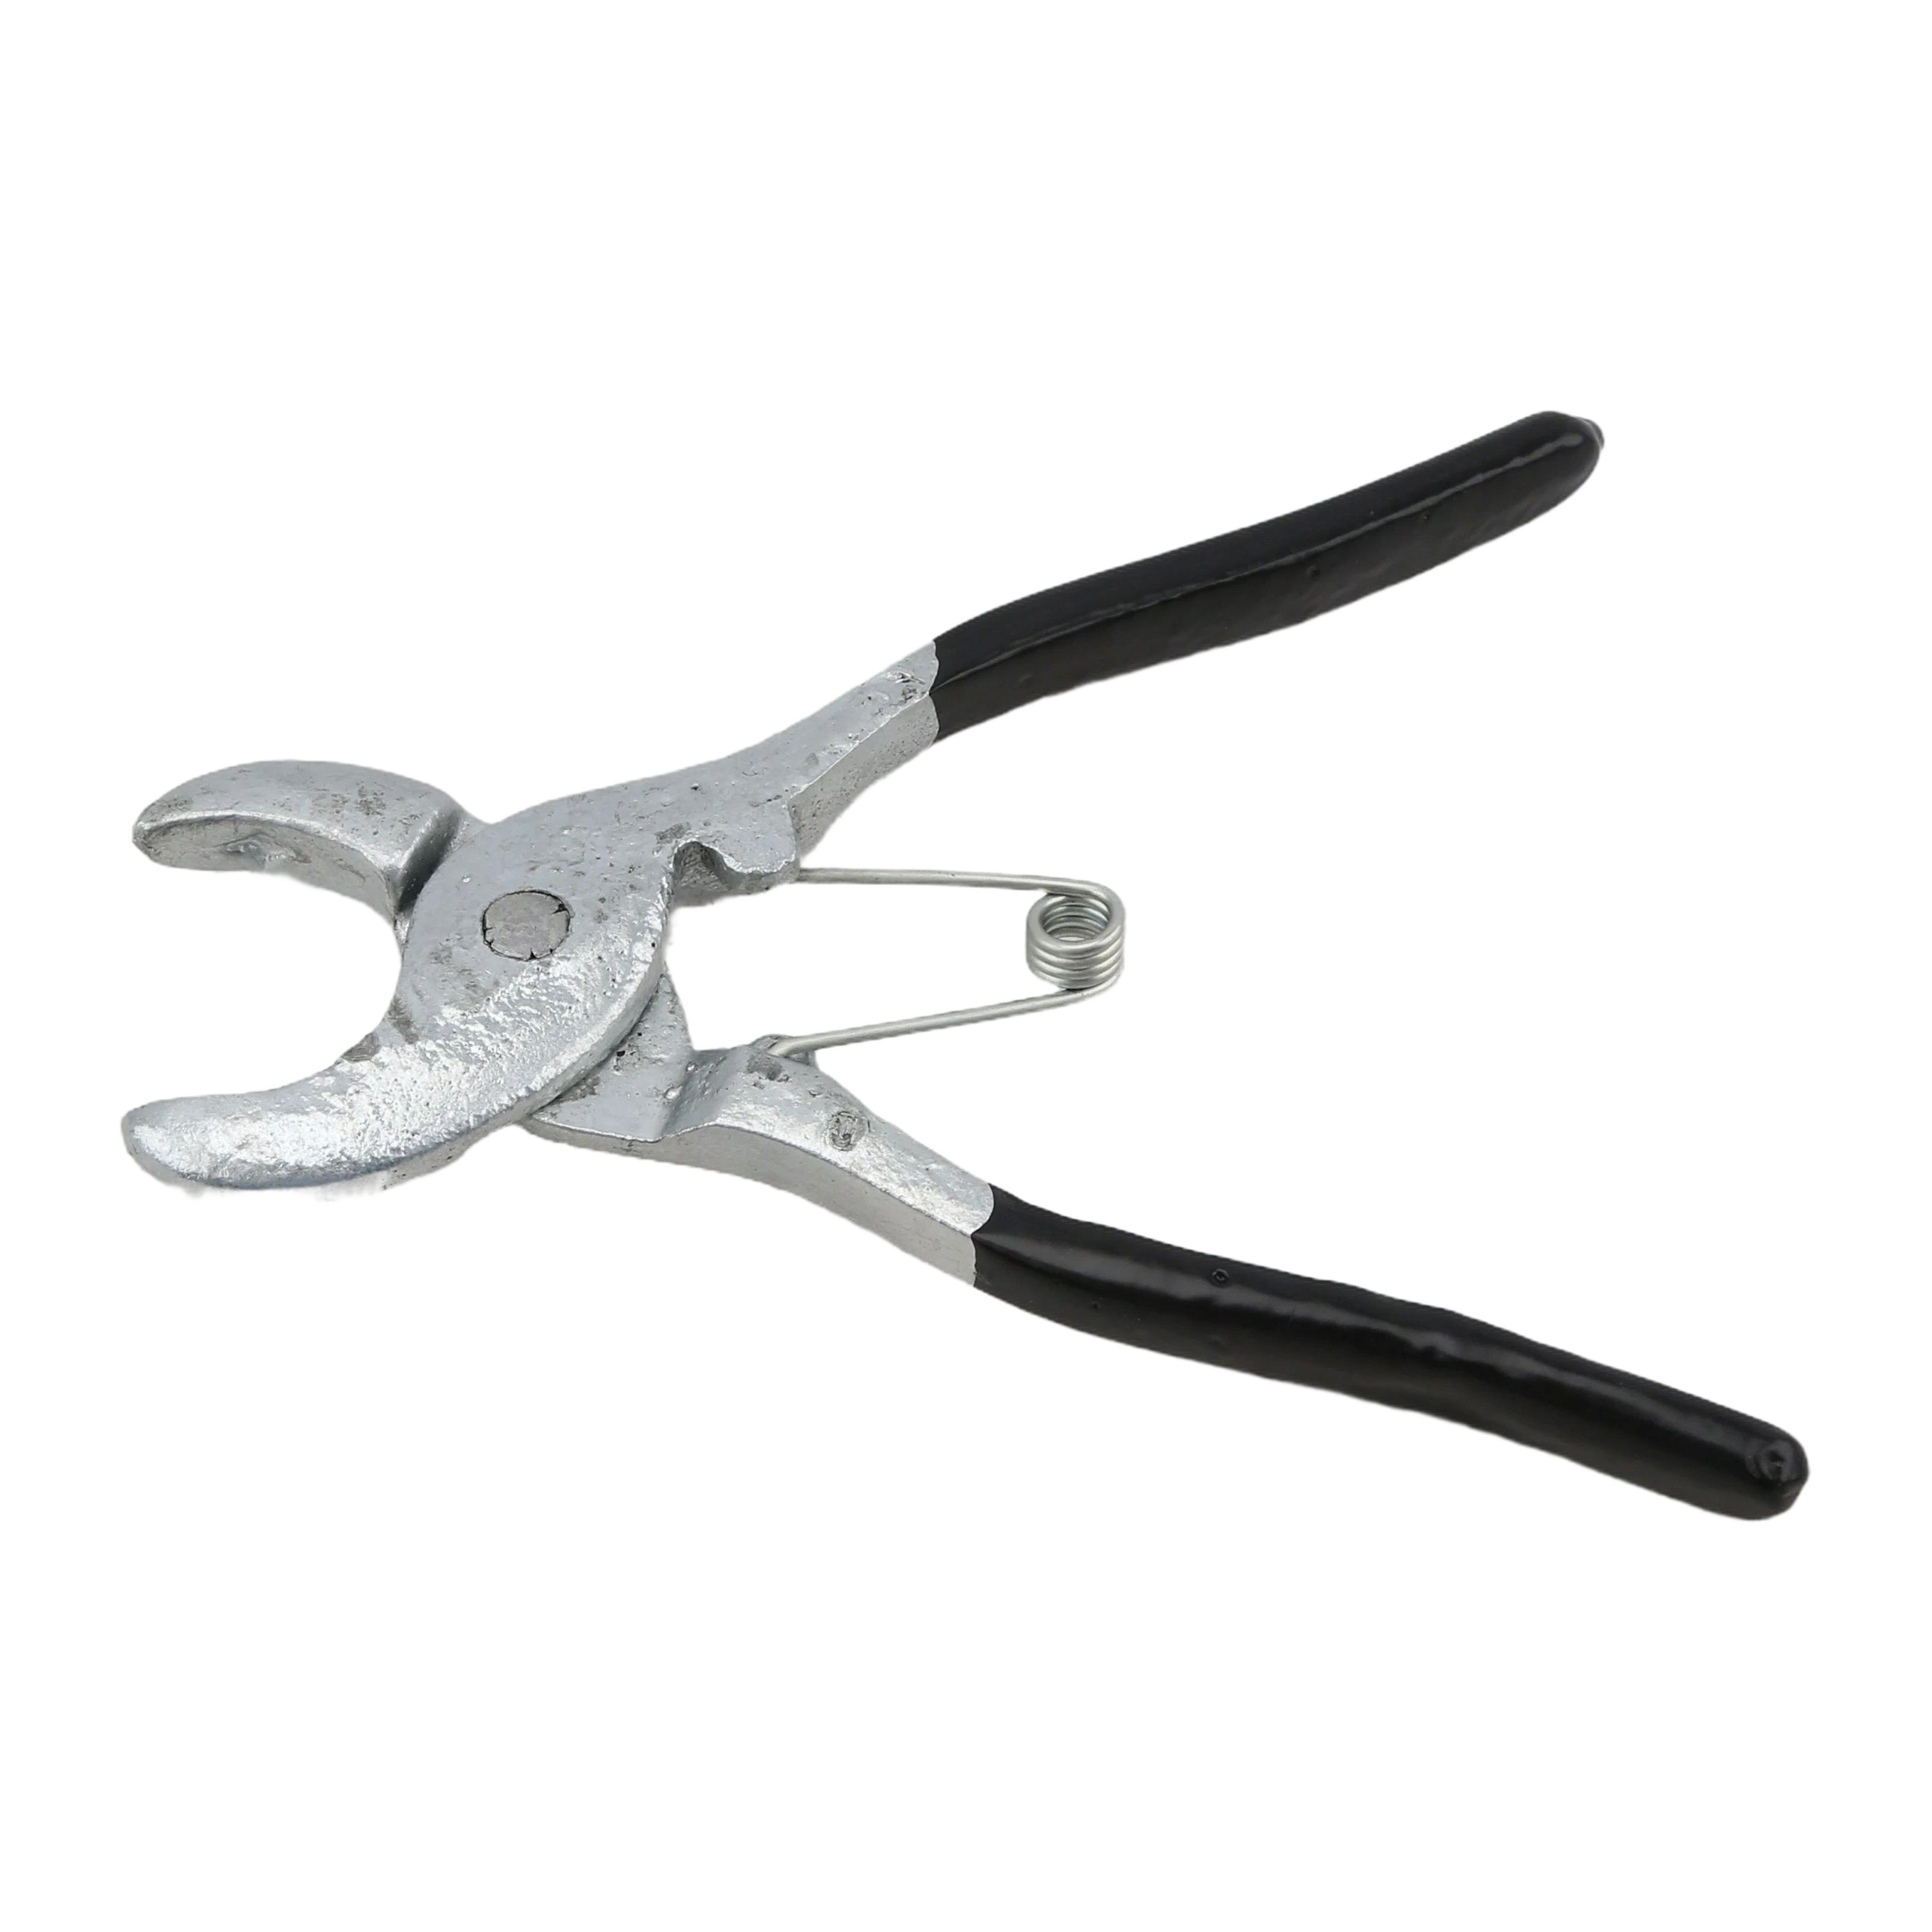 Blue Hawk Hog Ring Pliers 9.35-in Metal Hog Ring For Chain-link Fence at